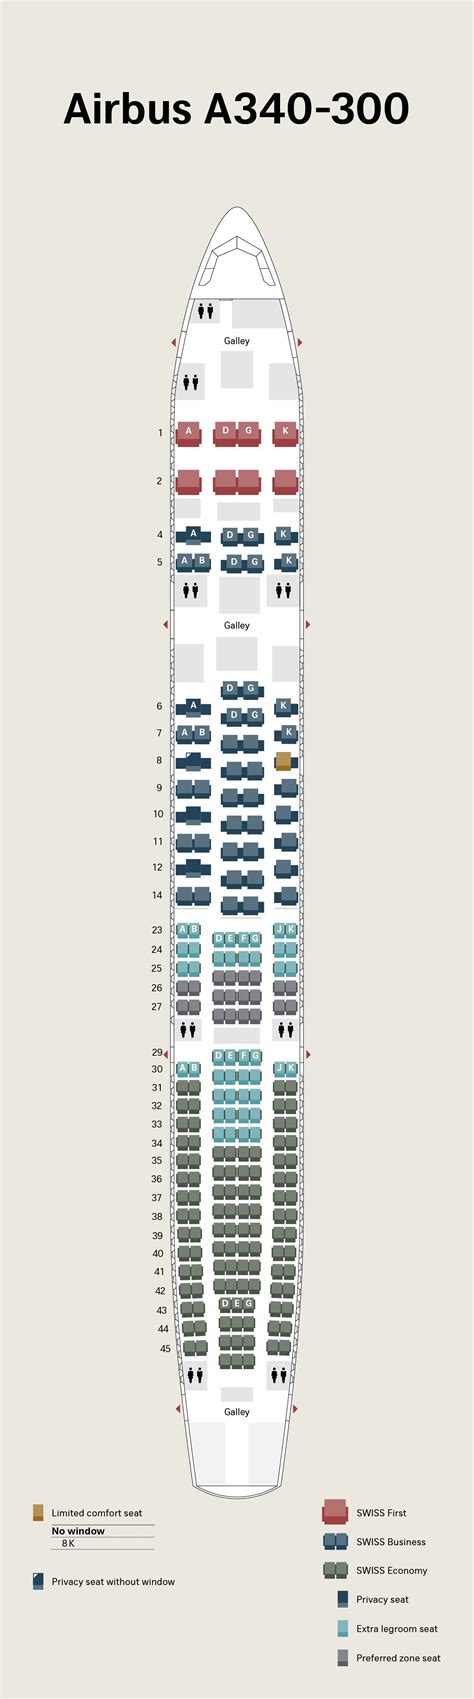 Airbus A343 Seating Plan Hot Sex Picture